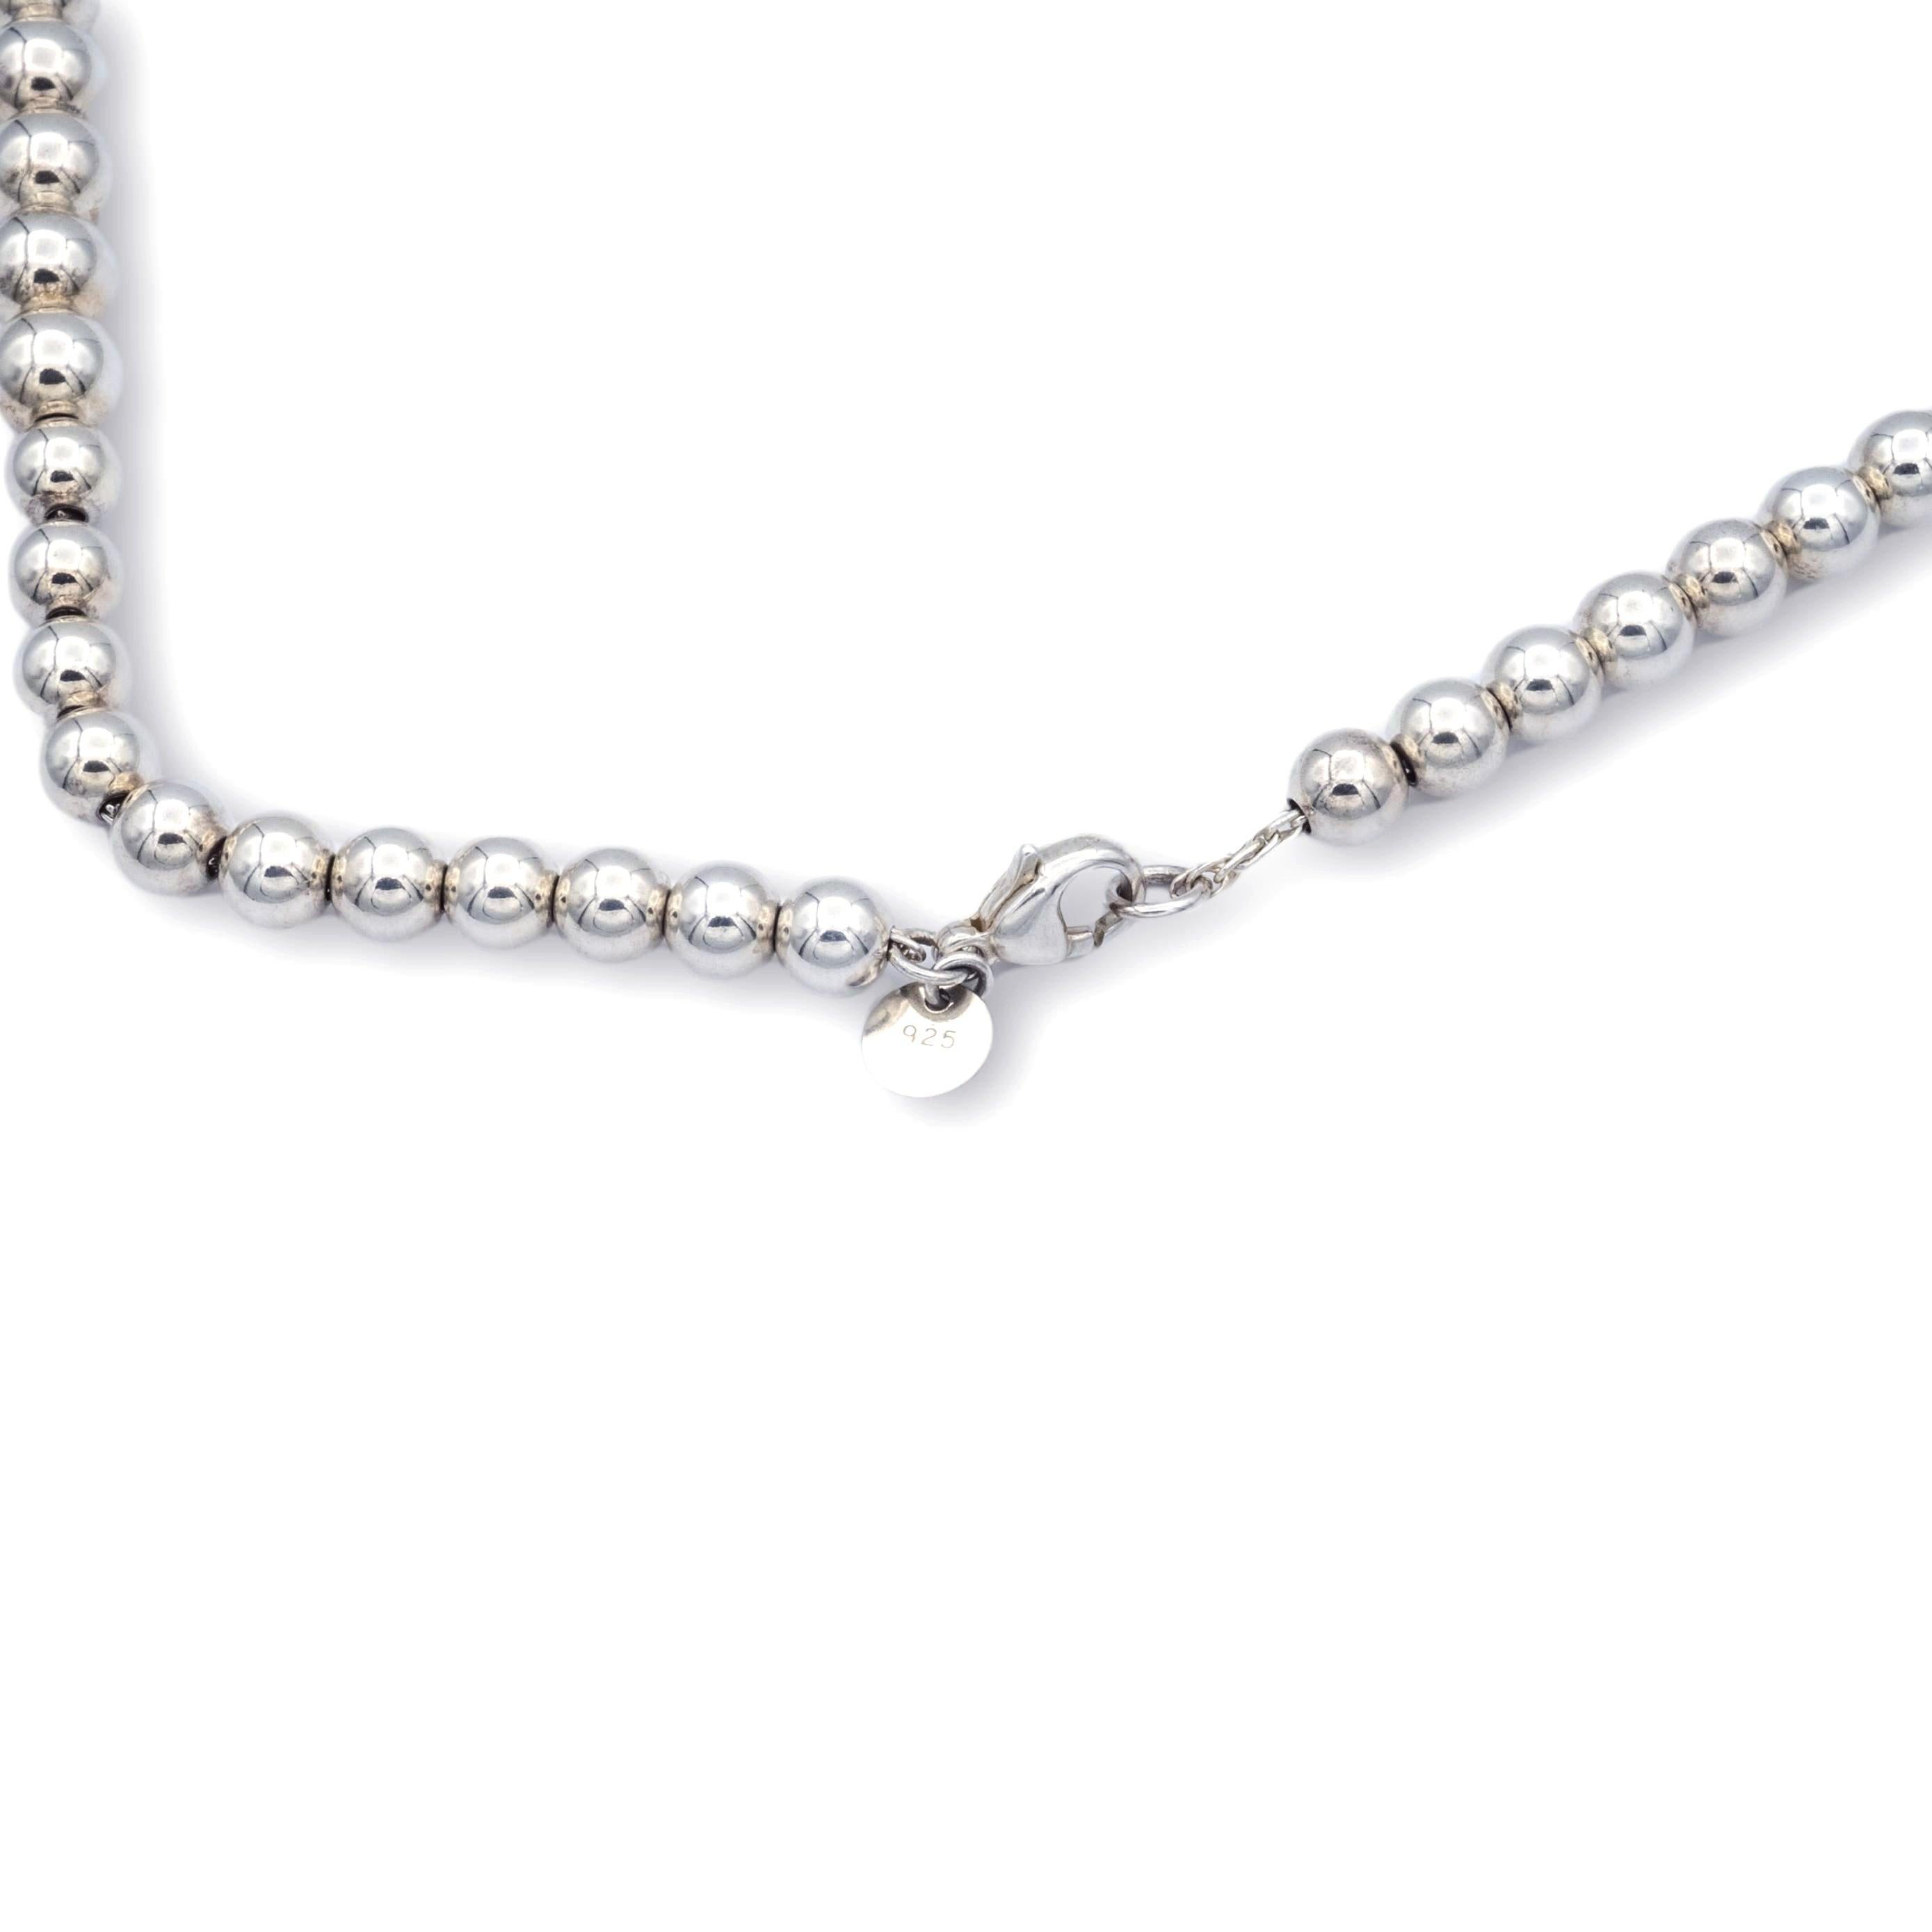 Tiffany & Co. necklace from the Hardware collection finely crafted in fine sterling silver with with 11mm balls at the front graduating to 6 mm balls at the back. Large lobster claw clasp.from925

Necklace Specifications

Brand: Tiffany &